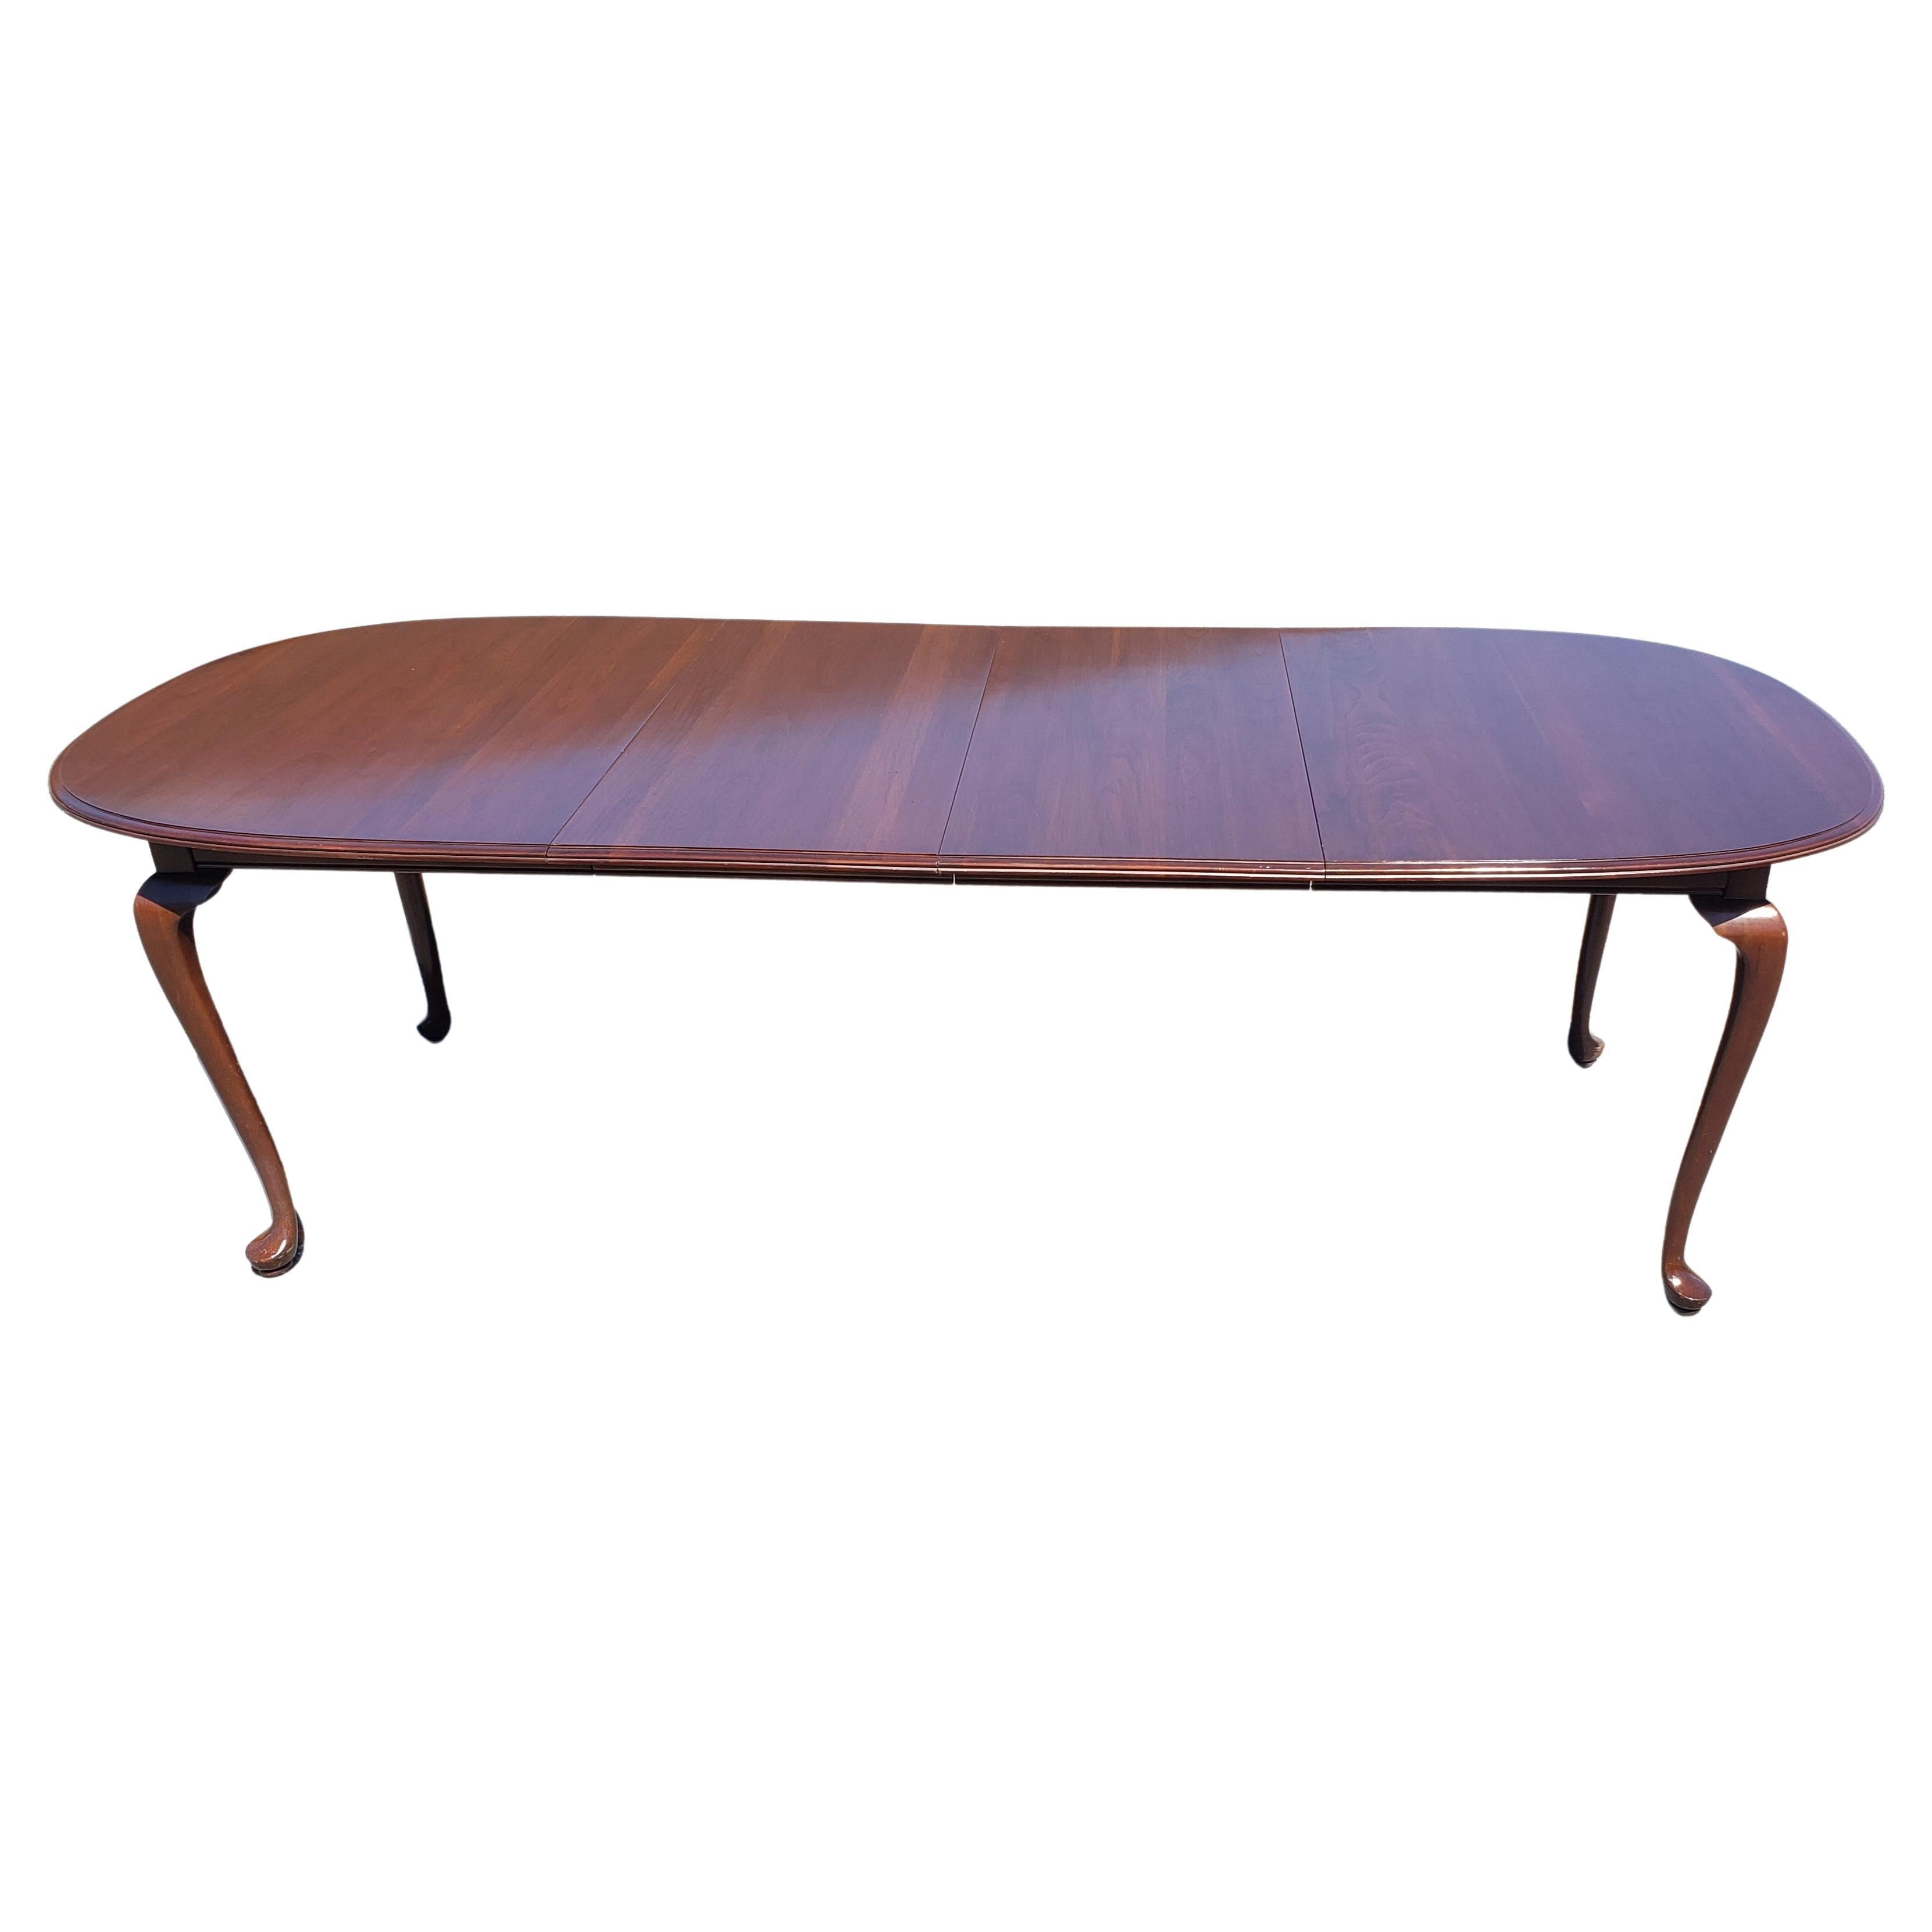 Ethan Allen Solid Cherry Extension Dining Room Table